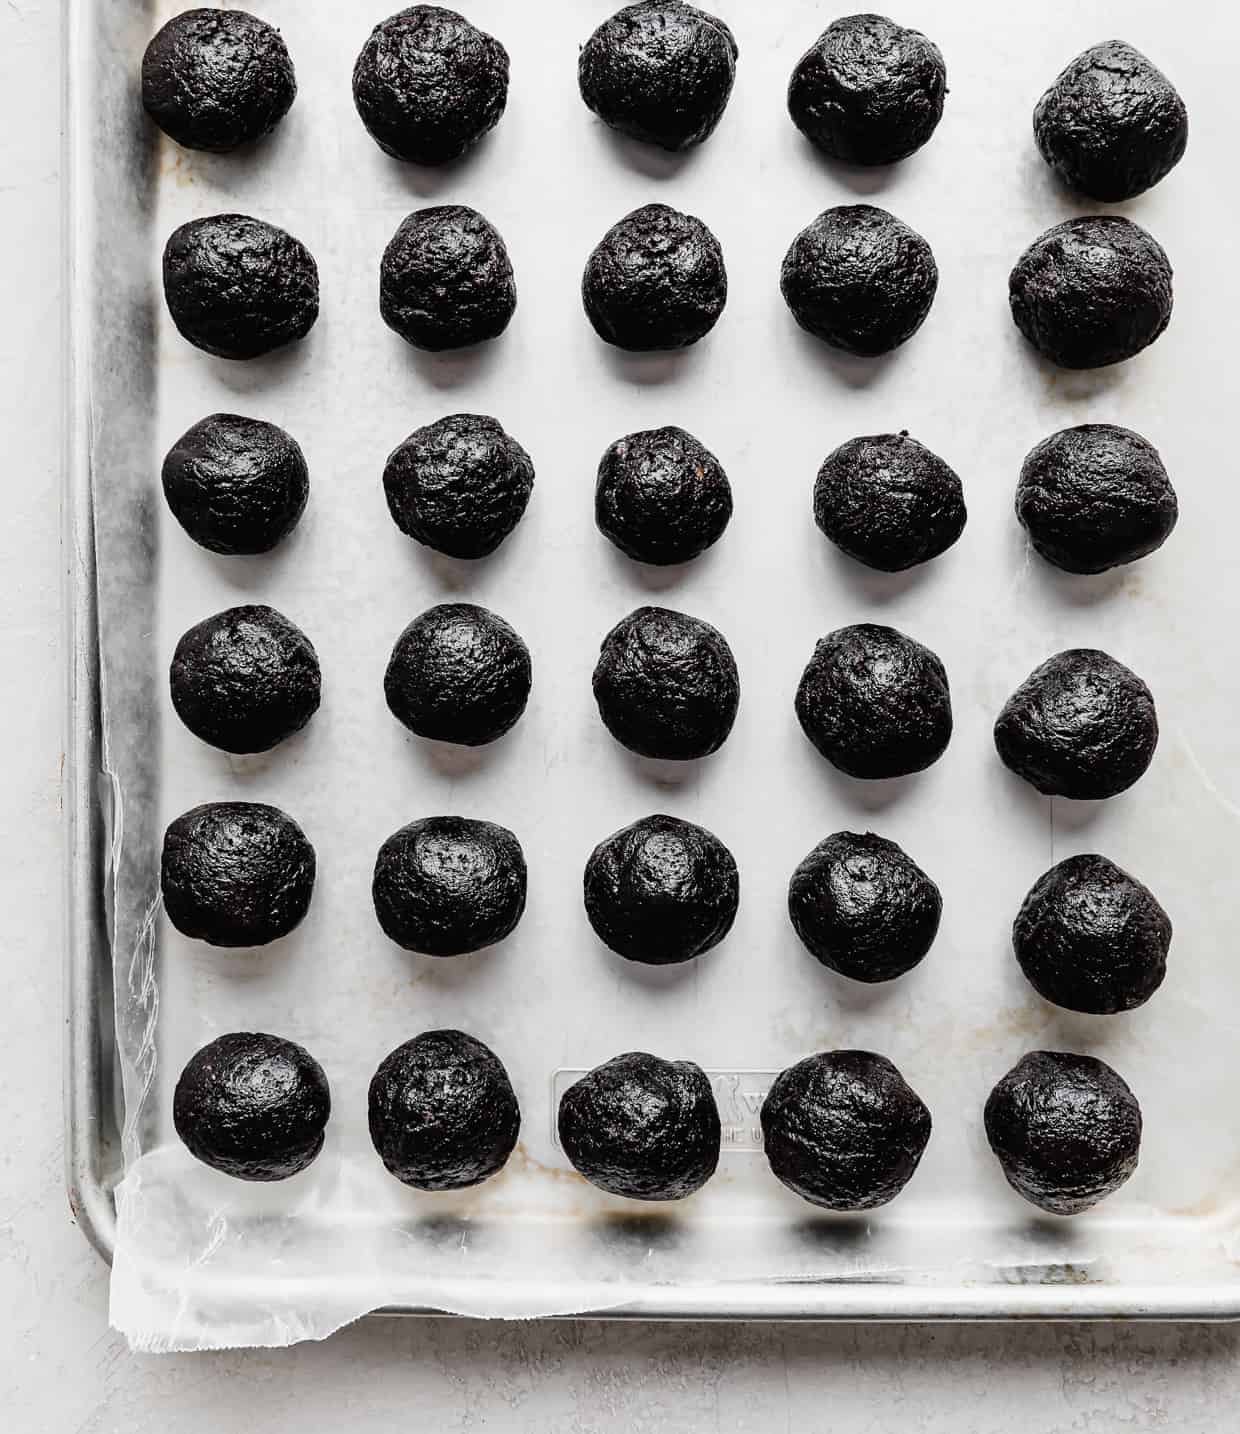 A wax paper lined baking sheet with round Oreo balls lined up on the sheet.